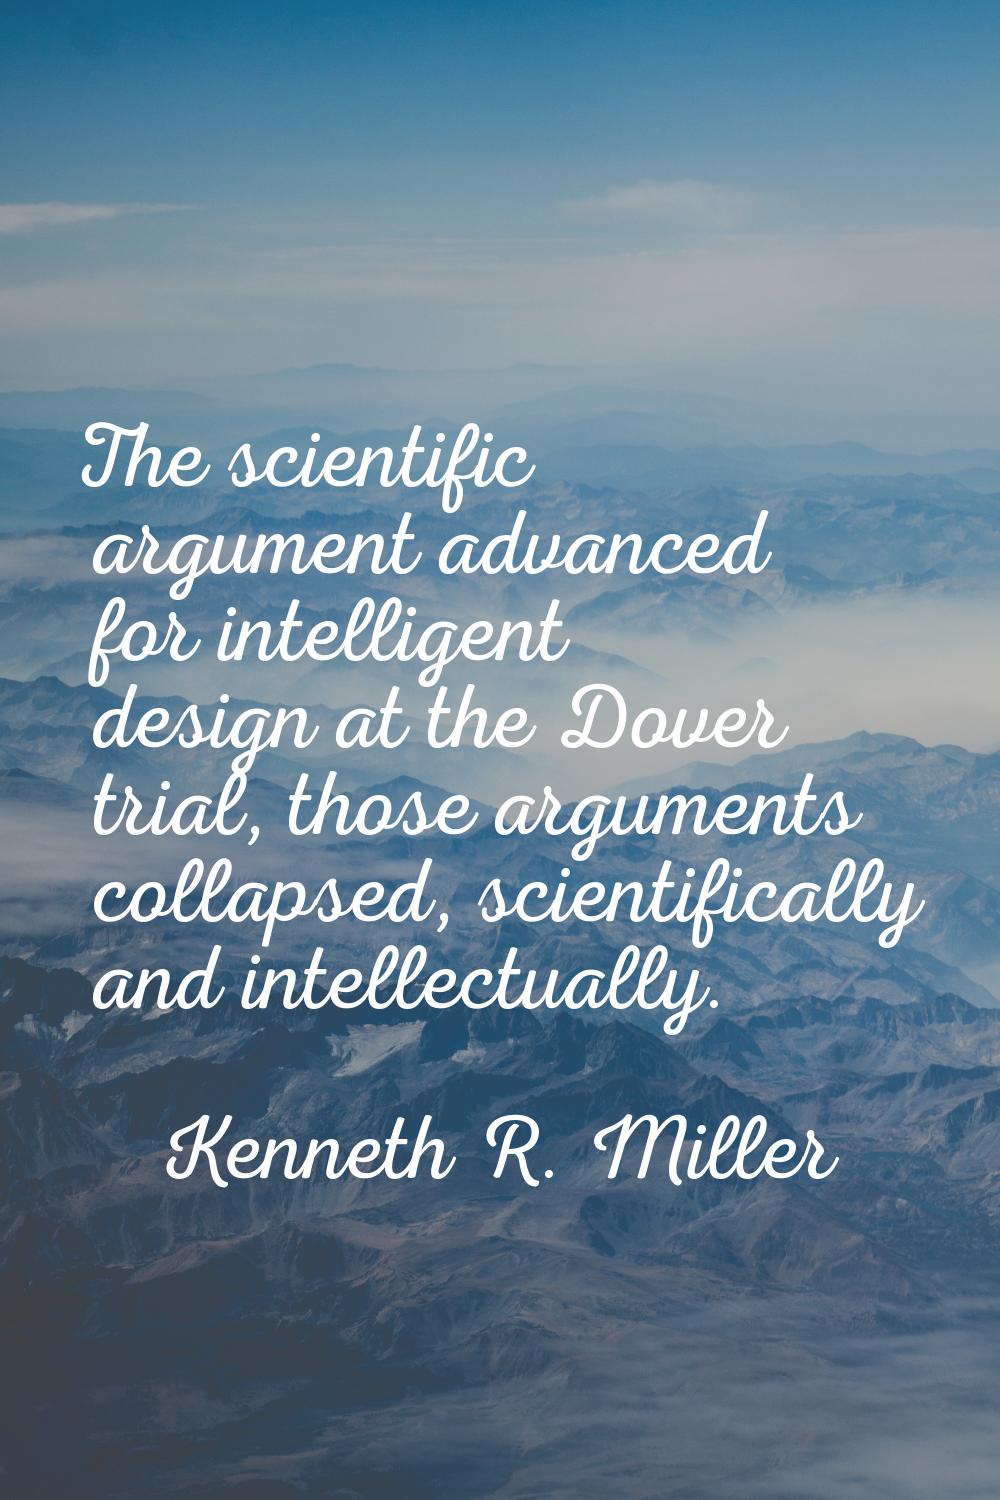 The scientific argument advanced for intelligent design at the Dover trial, those arguments collaps